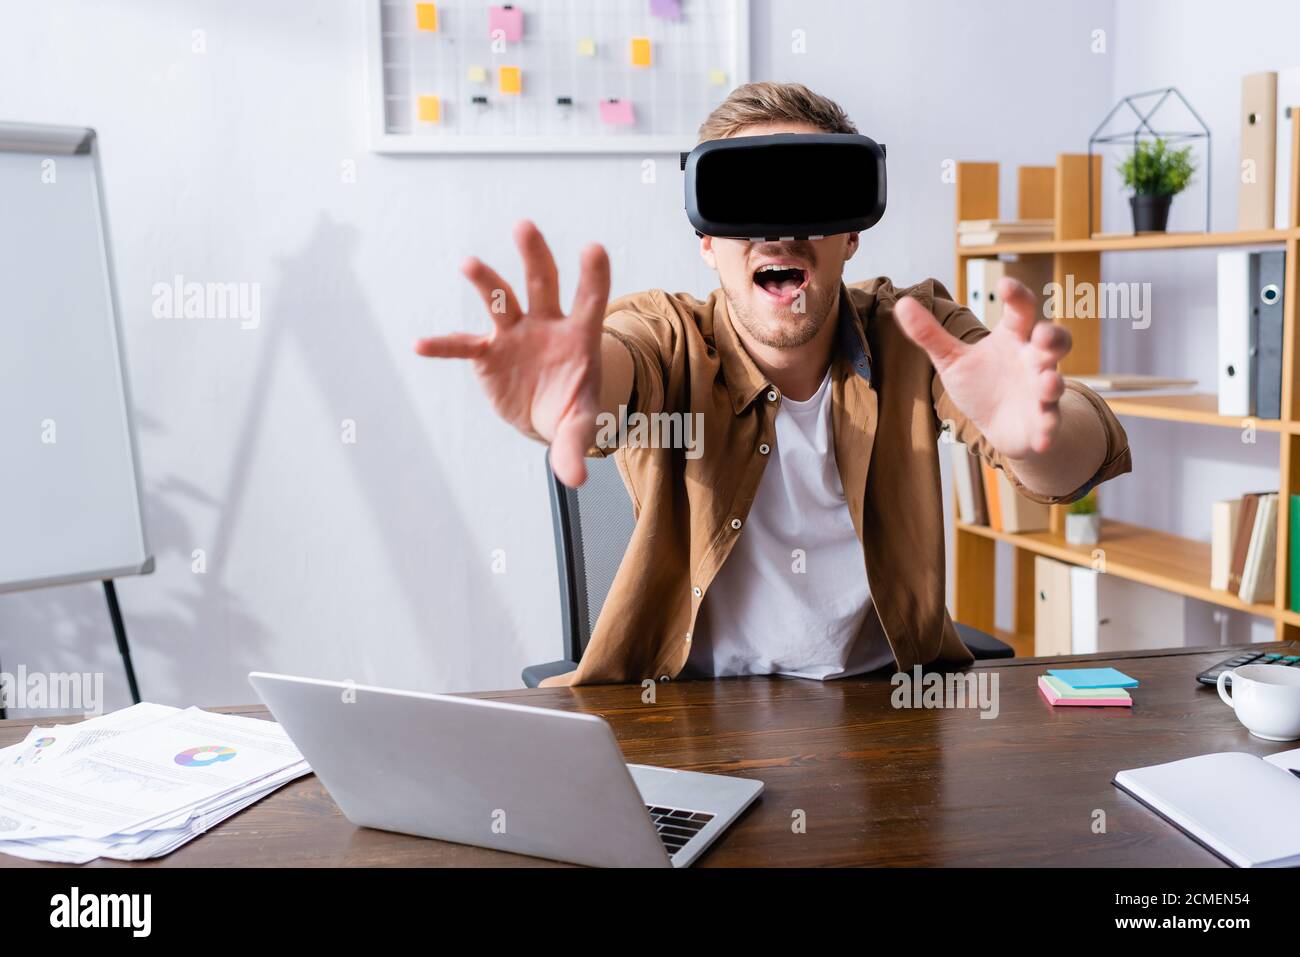 excited businessman in vr headset gesturing near laptop at workplace Stock Photo